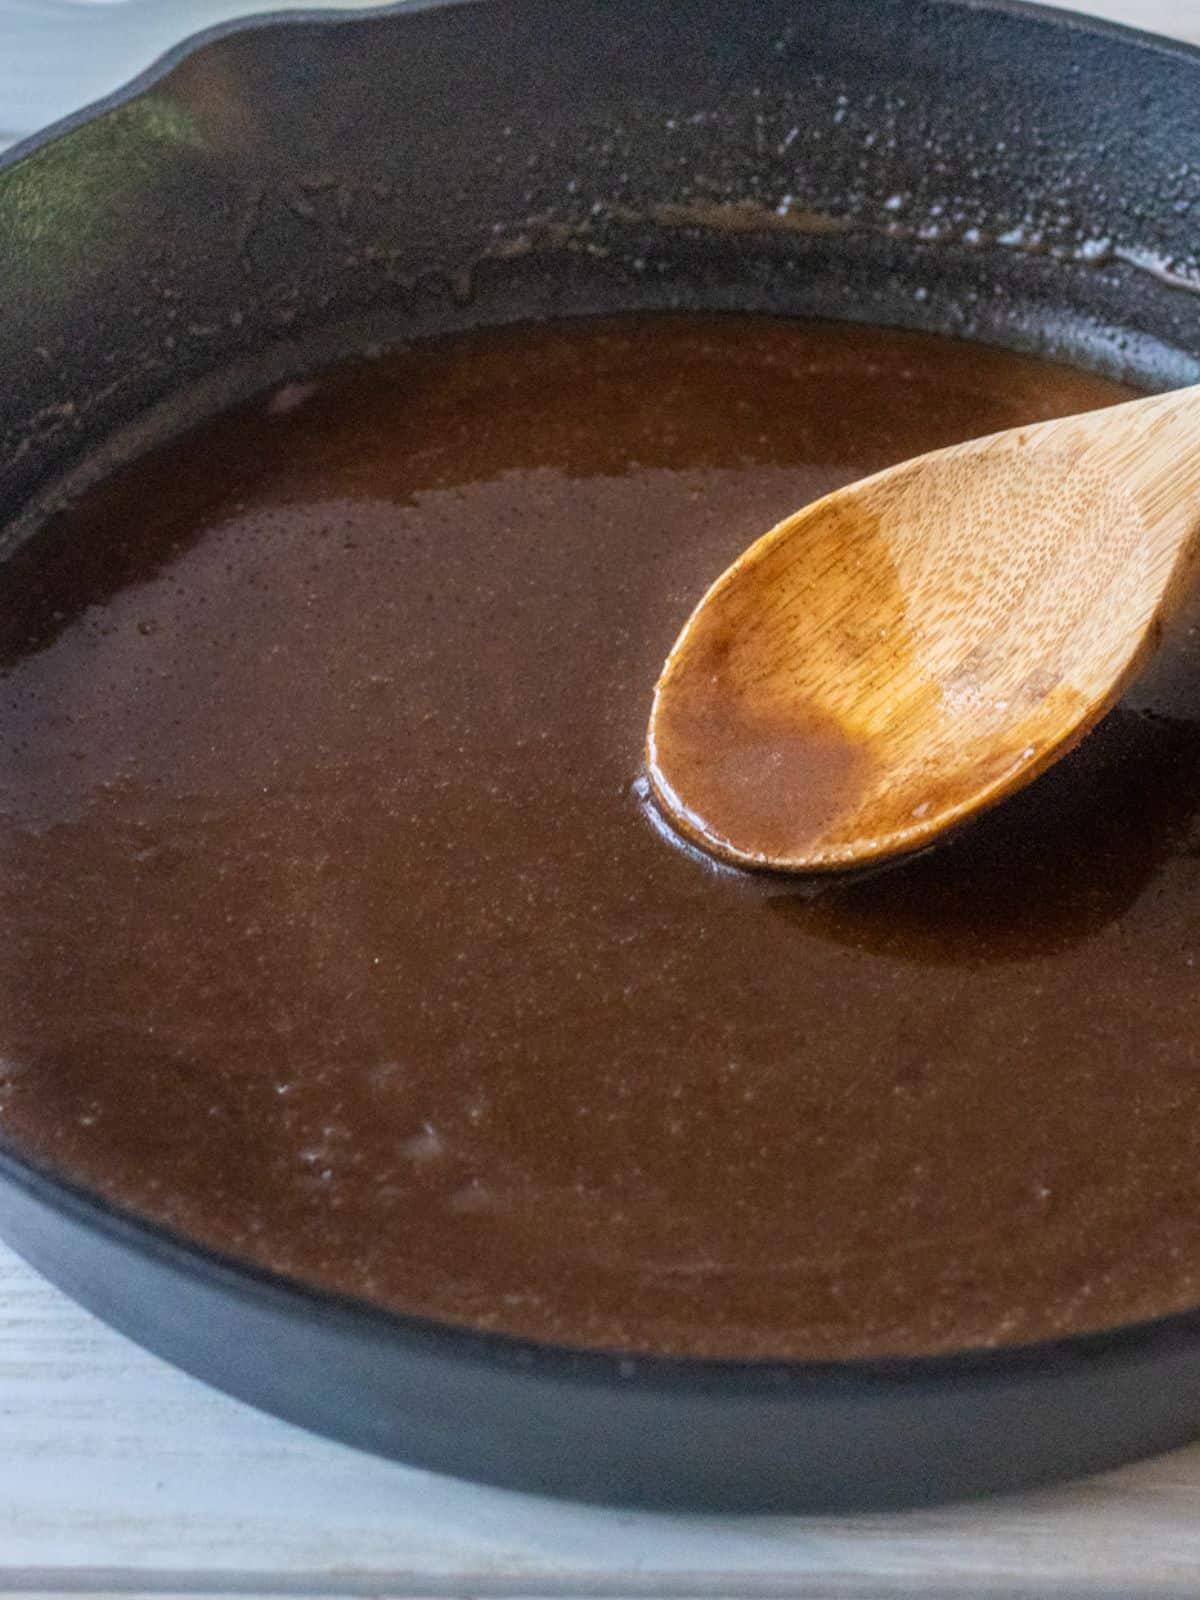 Brown sugar cinnamon sauce for the apples in a skillet with a wooden spoon.